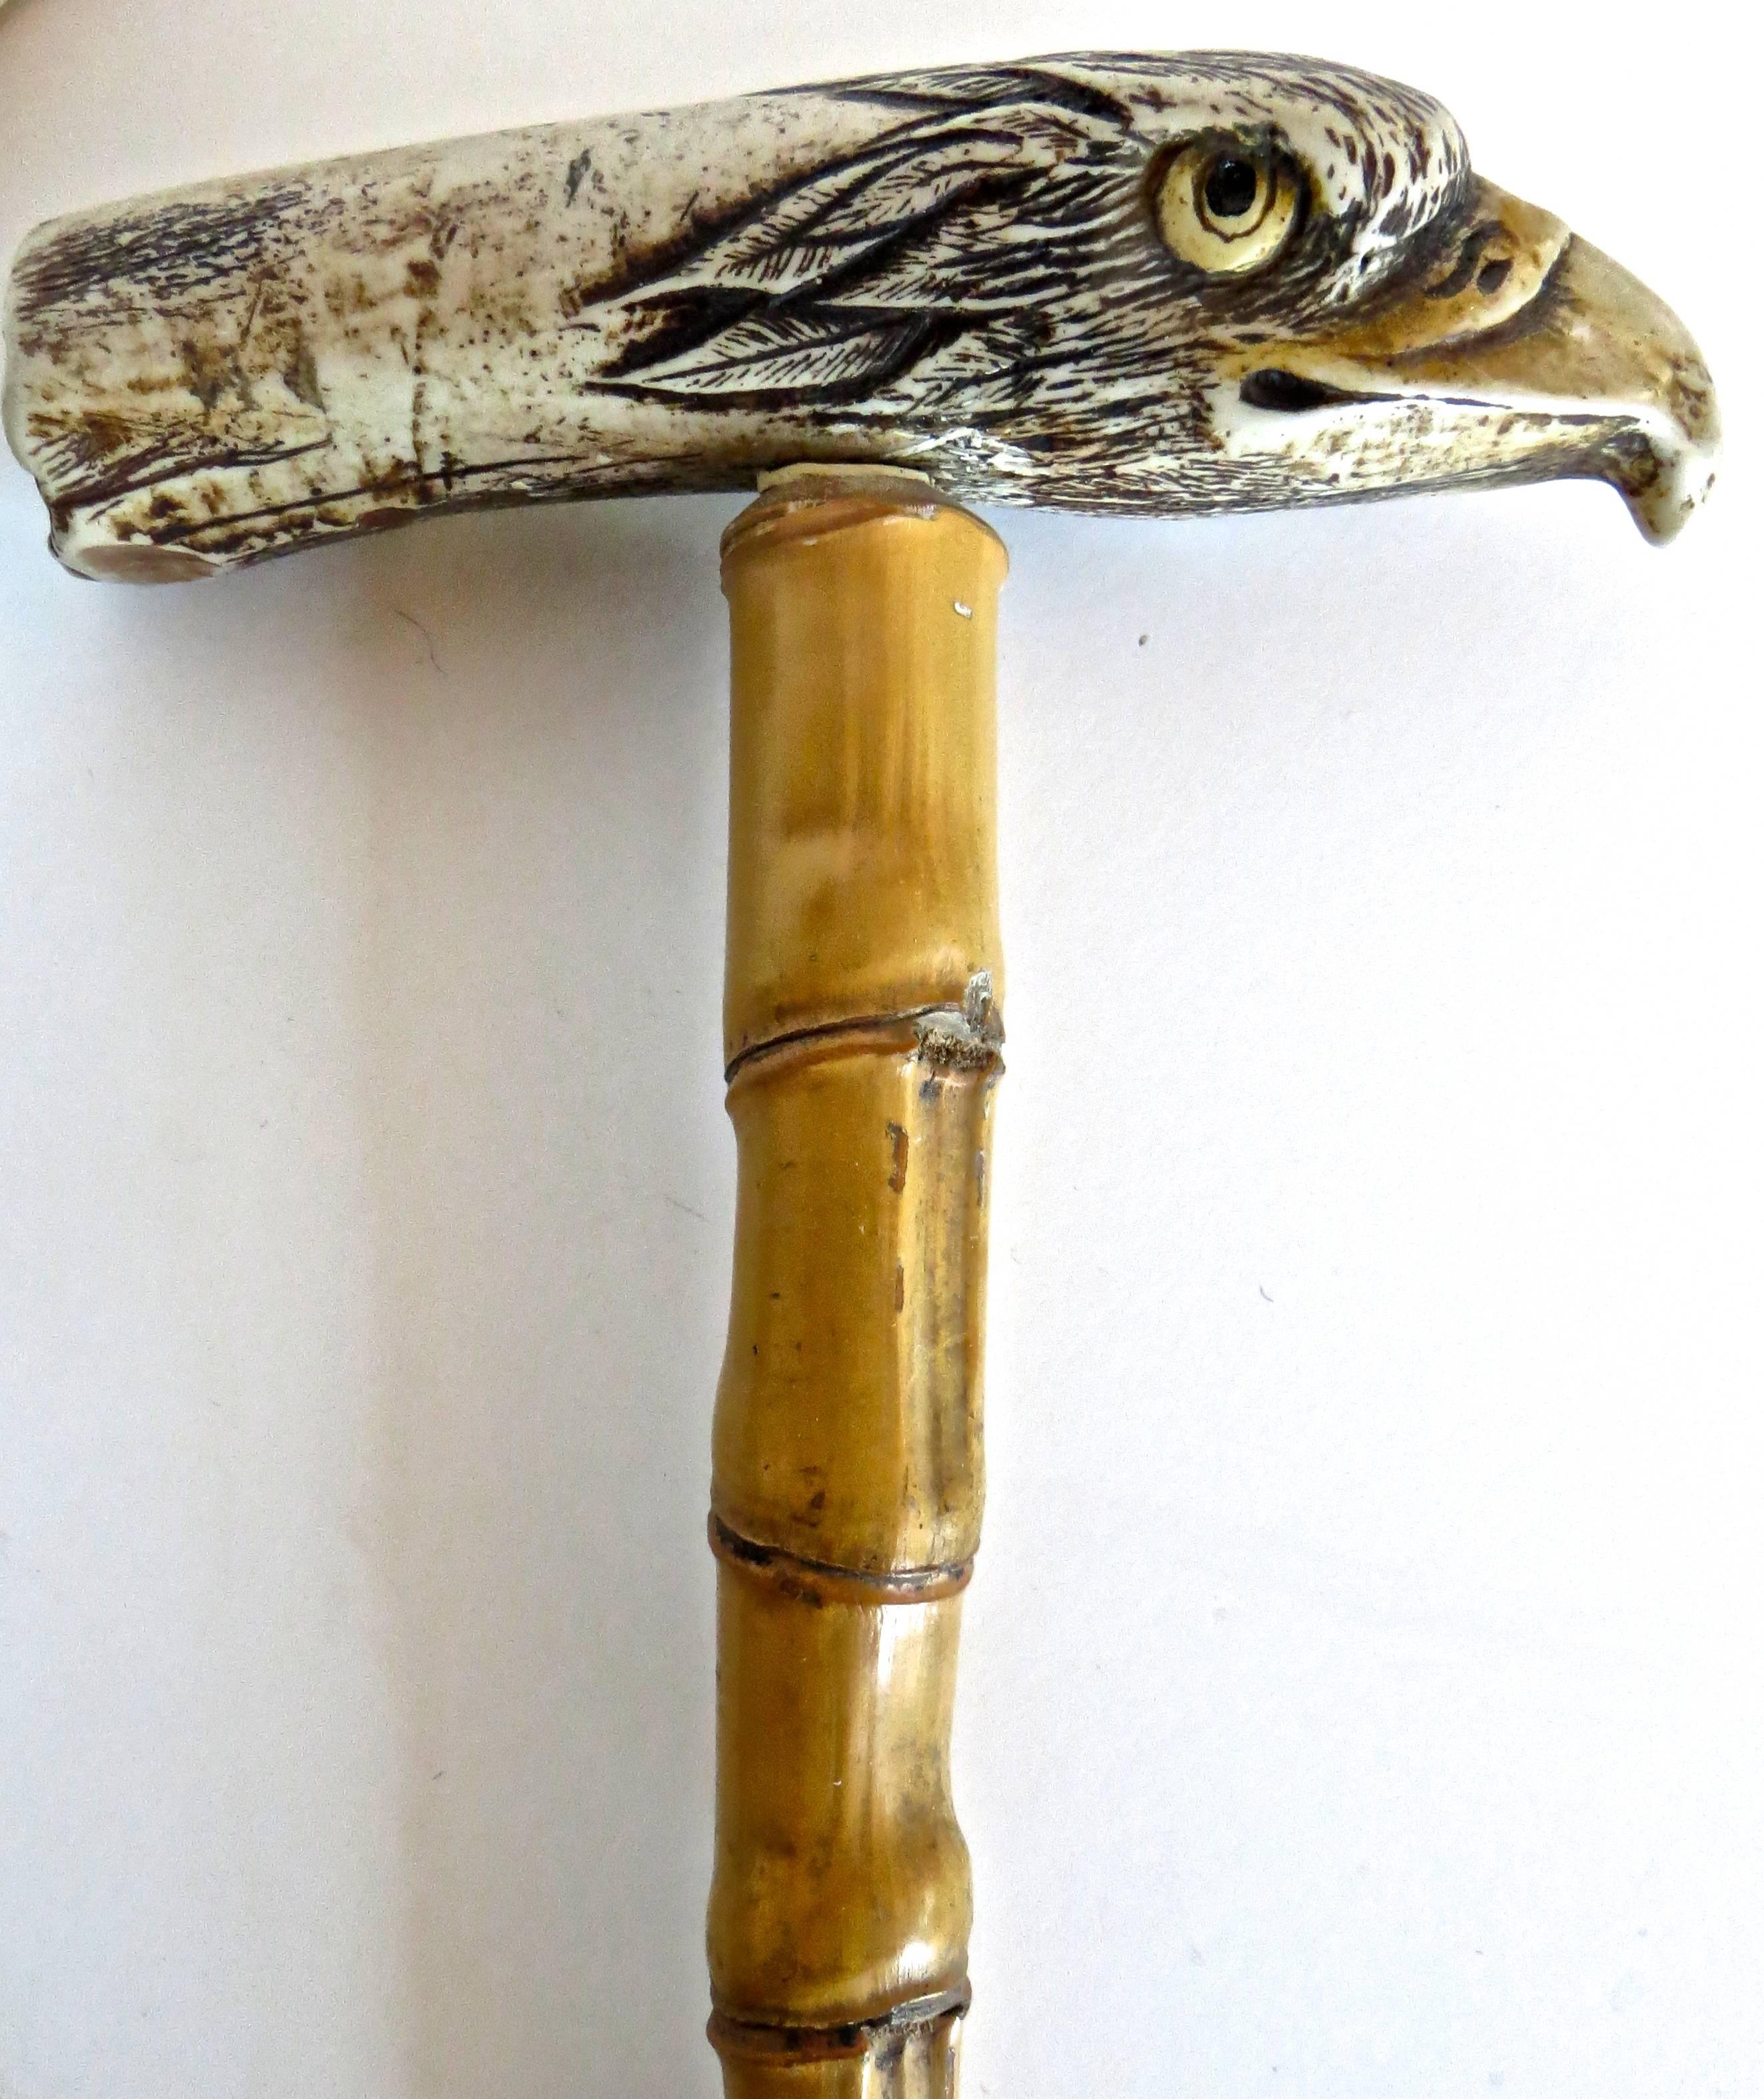 Late 19th century walking stick (cane) with a bone hand-carved handle in the shape and likeness of an eagle; mounted on hickory wood; tapered and ending in a wrapped pewter band. Realistic eagle features on the handle are highlighted and painted